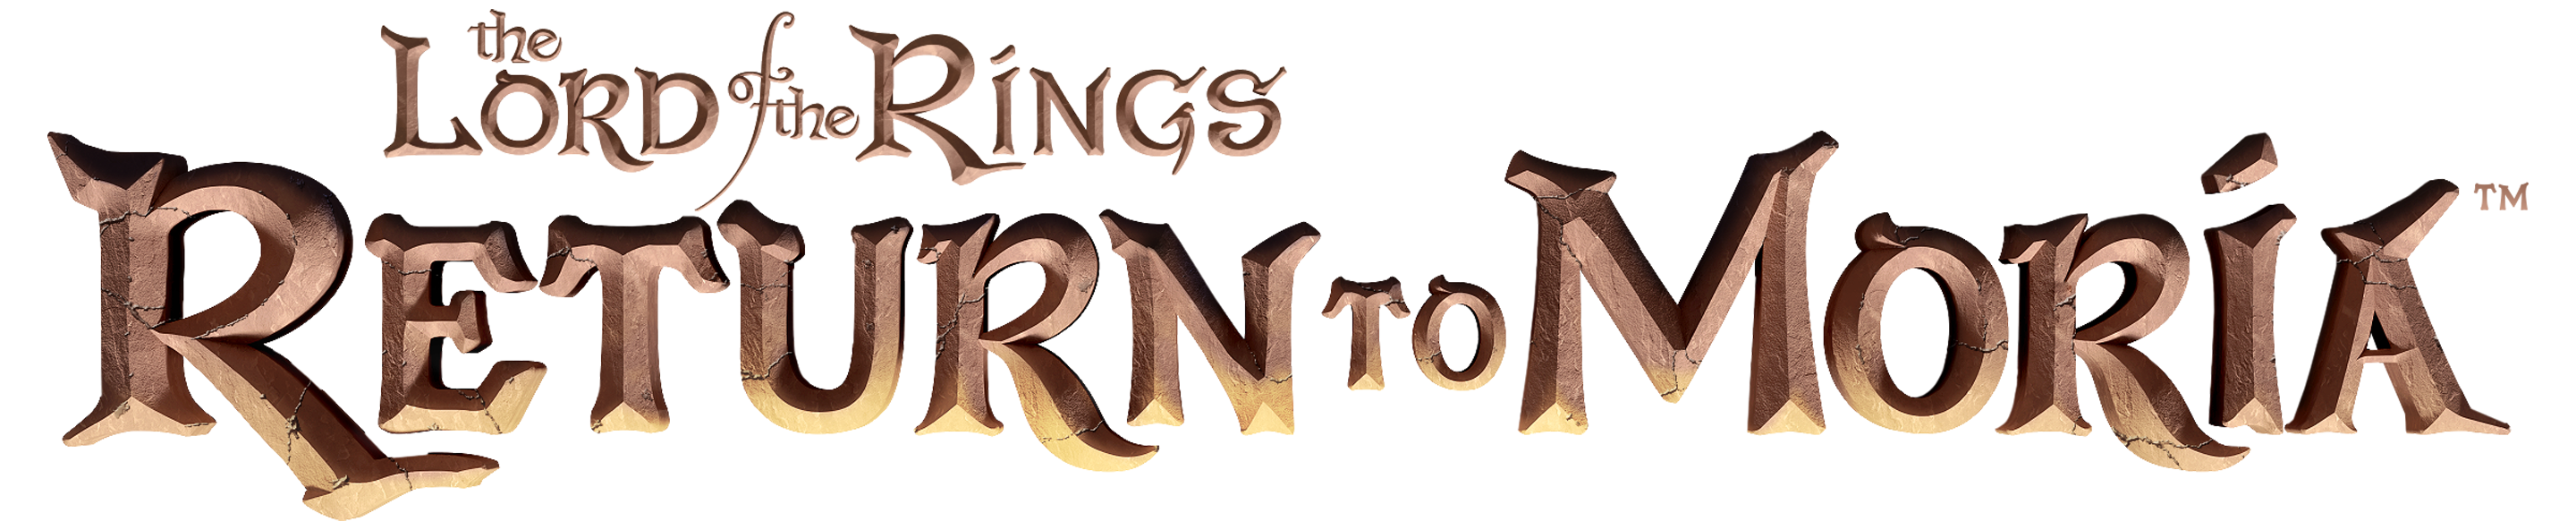  The Lord of the Rings: Return to Moria - PlayStation 5